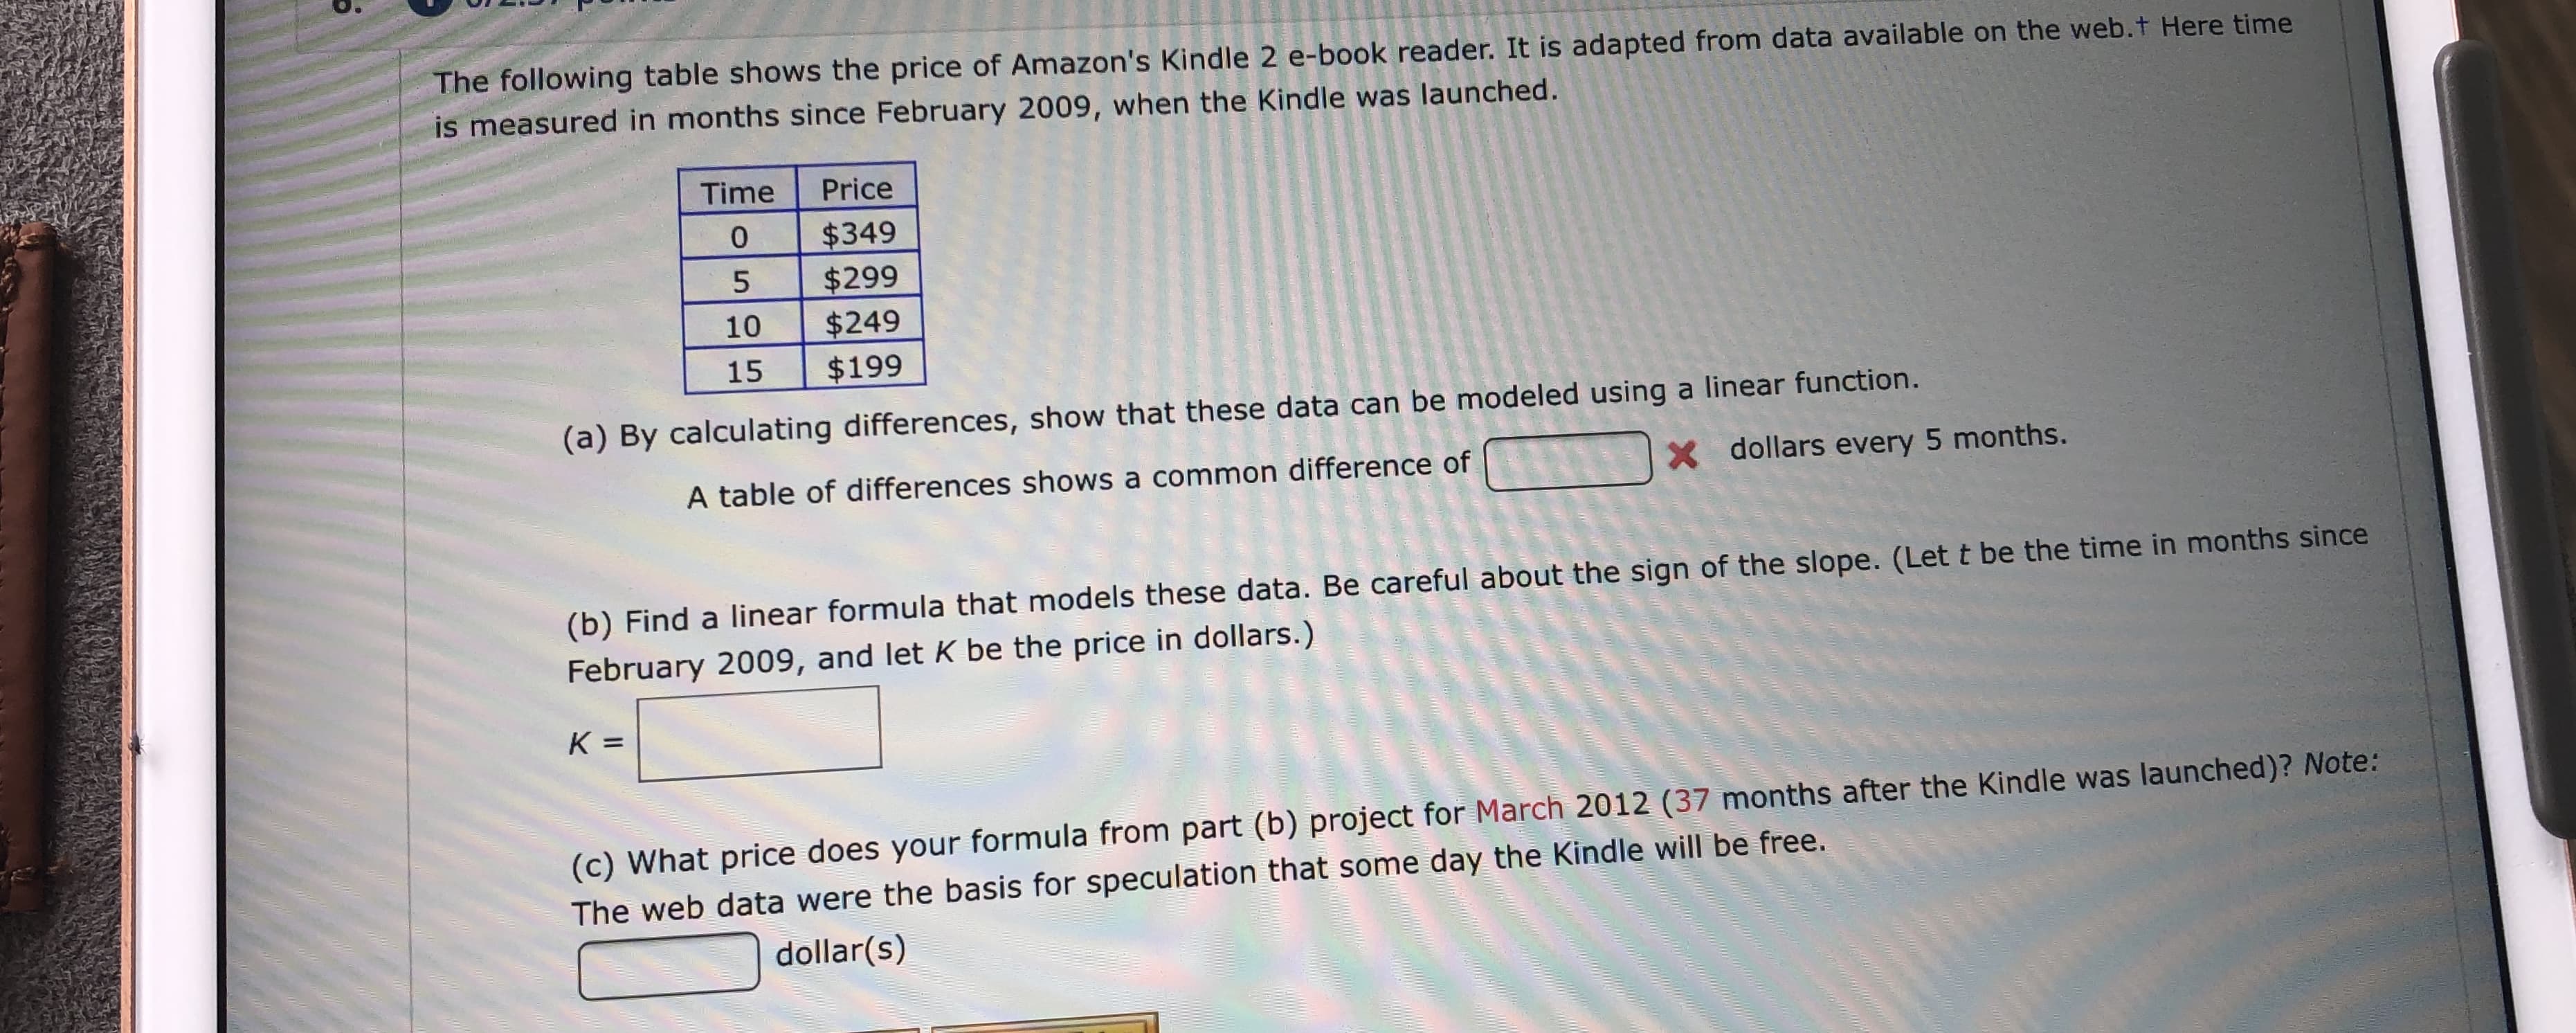 The following table shows the price of Amazon's Kindle 2 e-book reader. It is adapted from data available on the web.t Here time
is measured in months since February 2009, when the Kindle was launched.
Time
Price
$349
$299
$249
$199
0
5
10
15
(a) By calculating differences, show that these data can be modeled using a linear function.
X dollars every 5 months.
A table of differences shows a common difference of
(b) Find a linear formula that models these data. Be careful about the sign of the slope. (Let t be the time in months since
February 2009, and let K be the price in dollars.)
K =
(c) What price does your formula from part (b) project for March 2012 (37 months after the Kindle was launched)? Note:
The web data were the basis for speculation that some day the Kindle will be free.
dollar(s)
